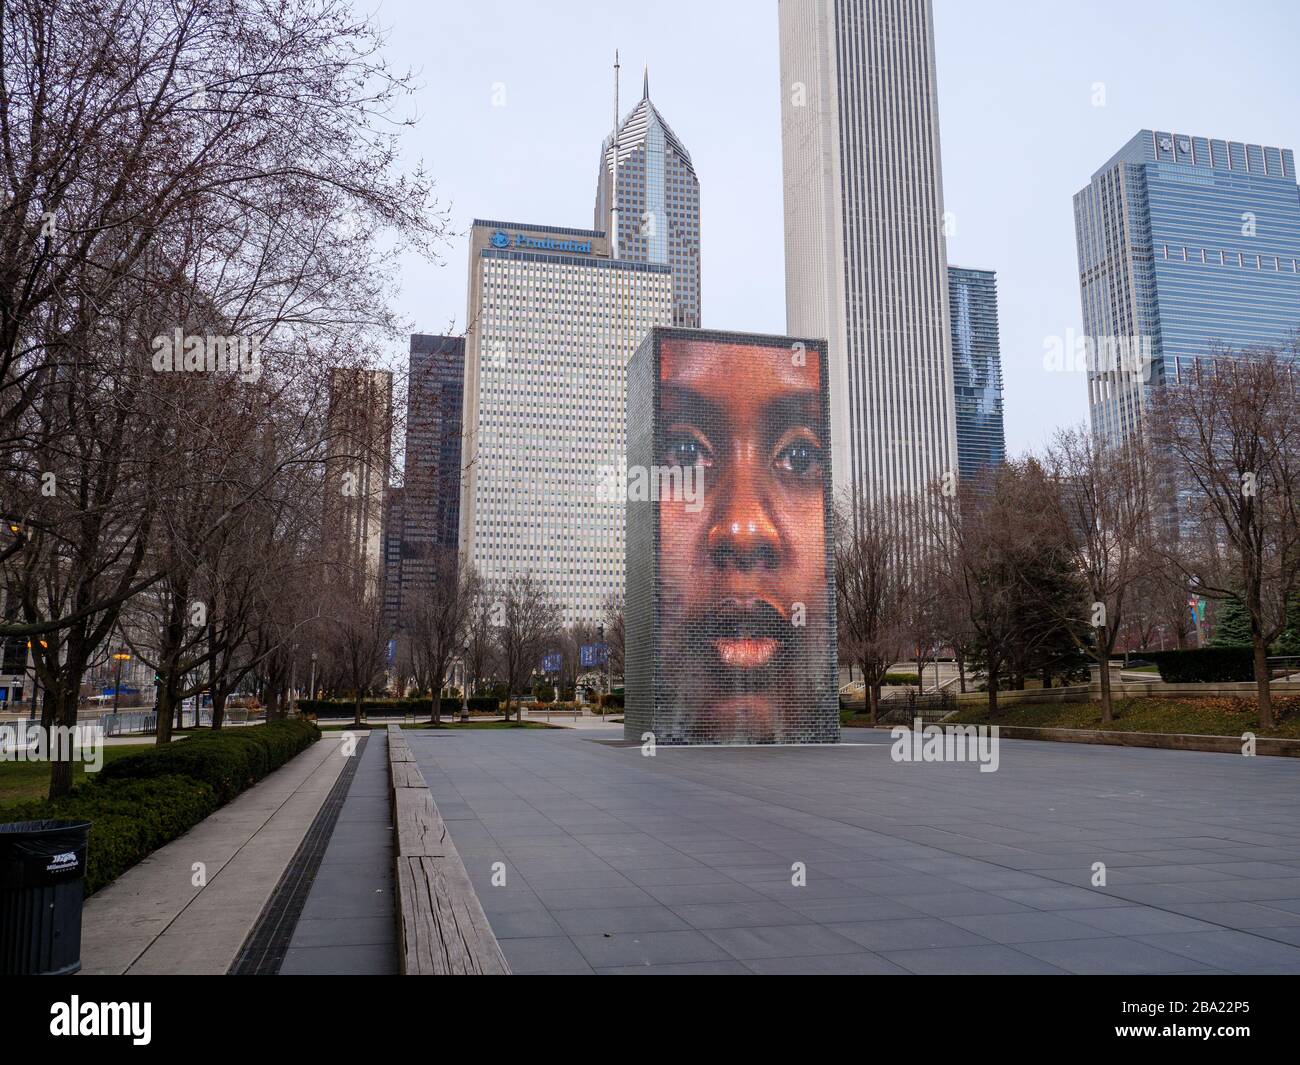 Chicago, Illinois, USA. 24th March 2020. An empty Crown Fountain in Millennium Park during the COVID-19 pandemic. Stock Photo